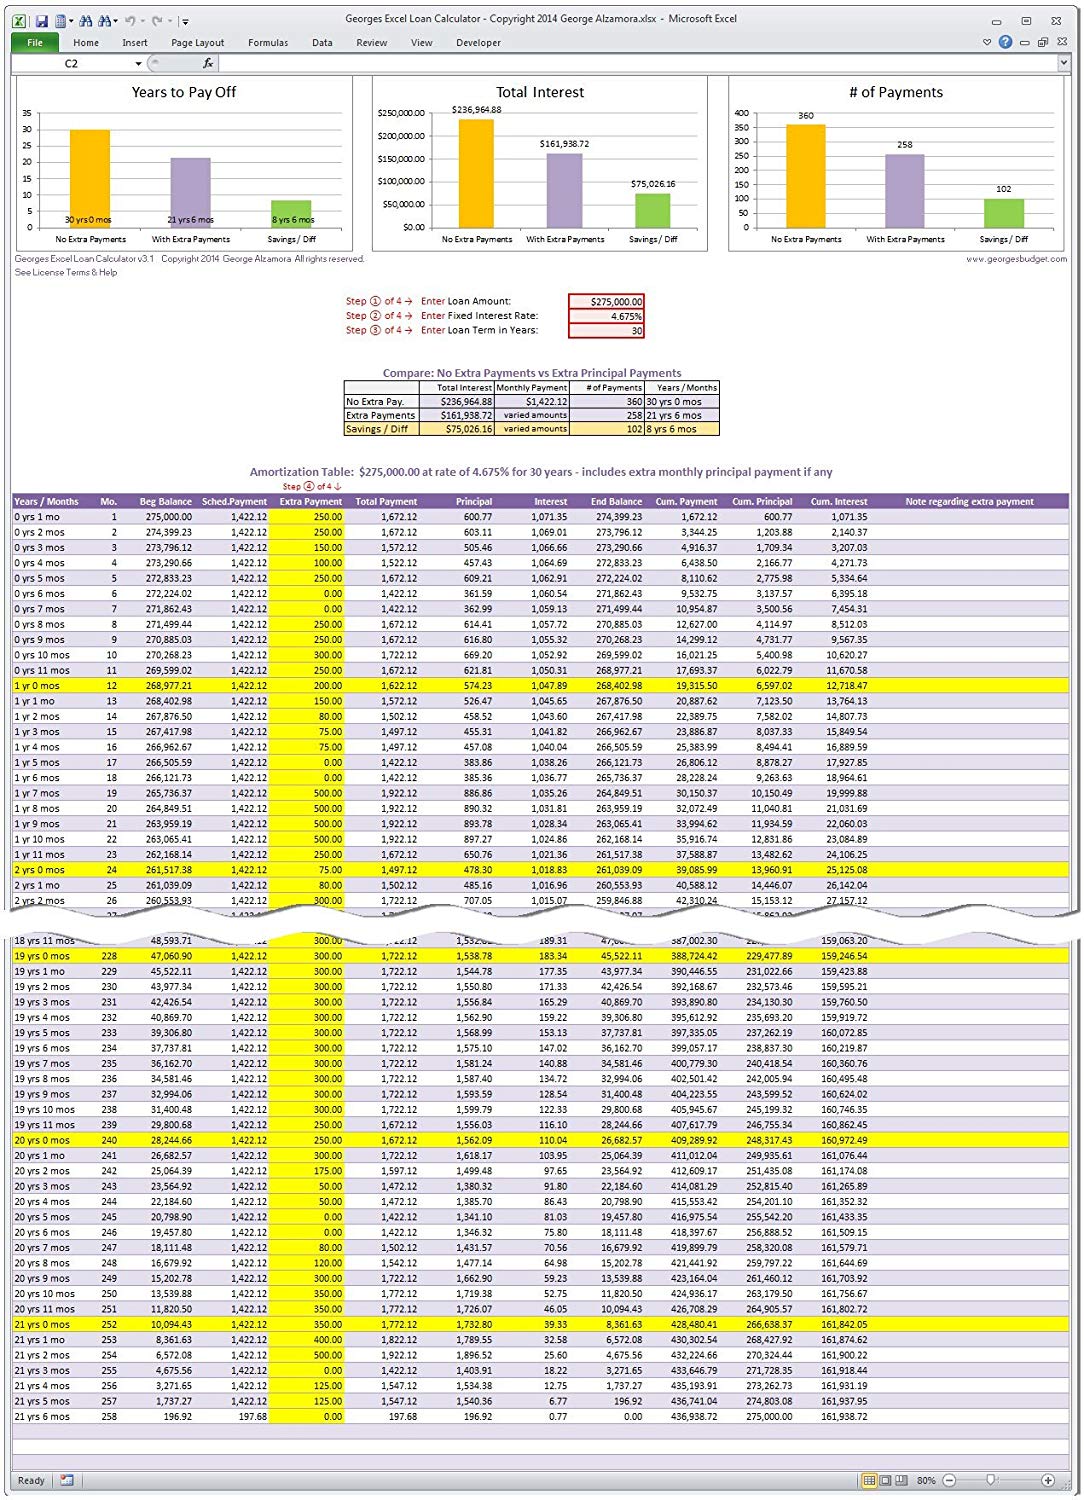 Download Mortgage Amortization Schedule Excel Template With Extra Payments with Mortgage Amortization Schedule Excel Template With Extra Payments Sample